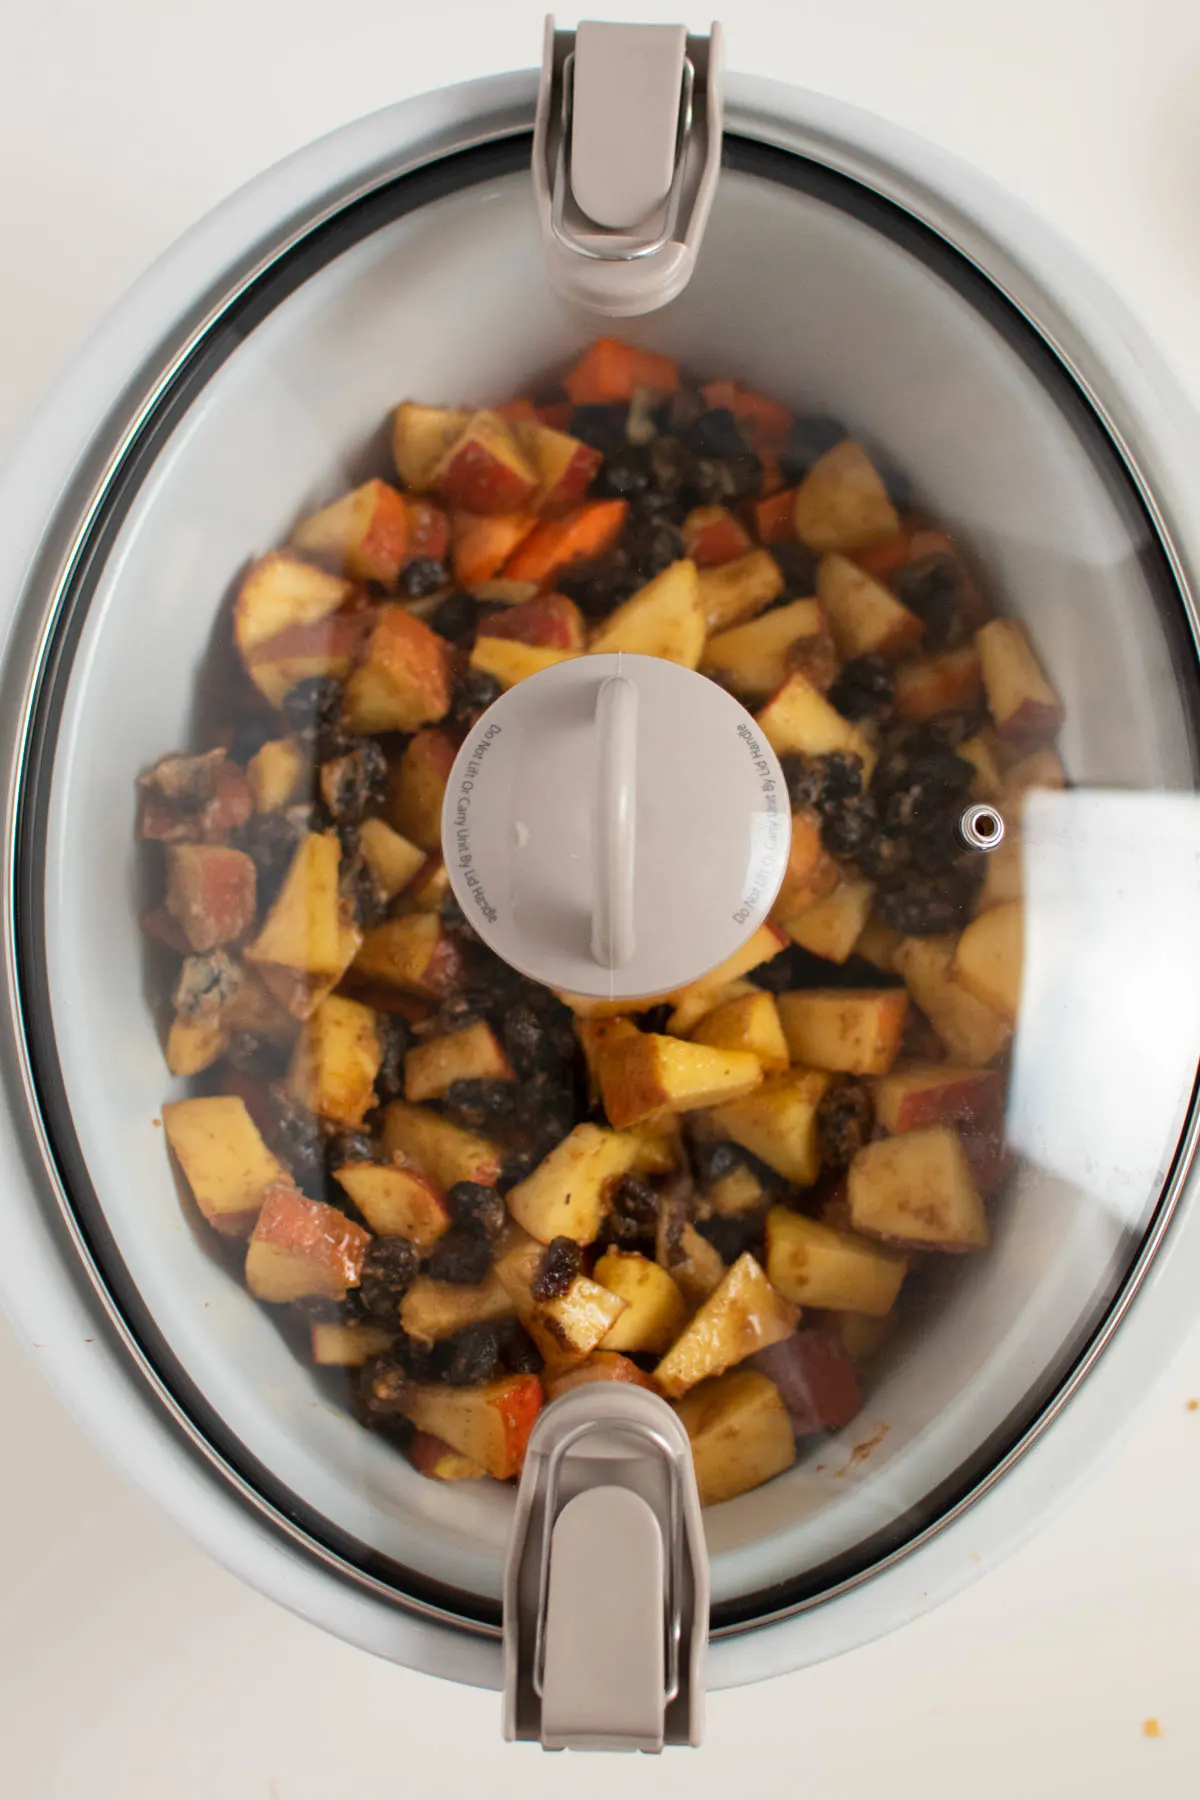 Lid on slow cooker full of sweet potatoes, apples, and dried cranberries.